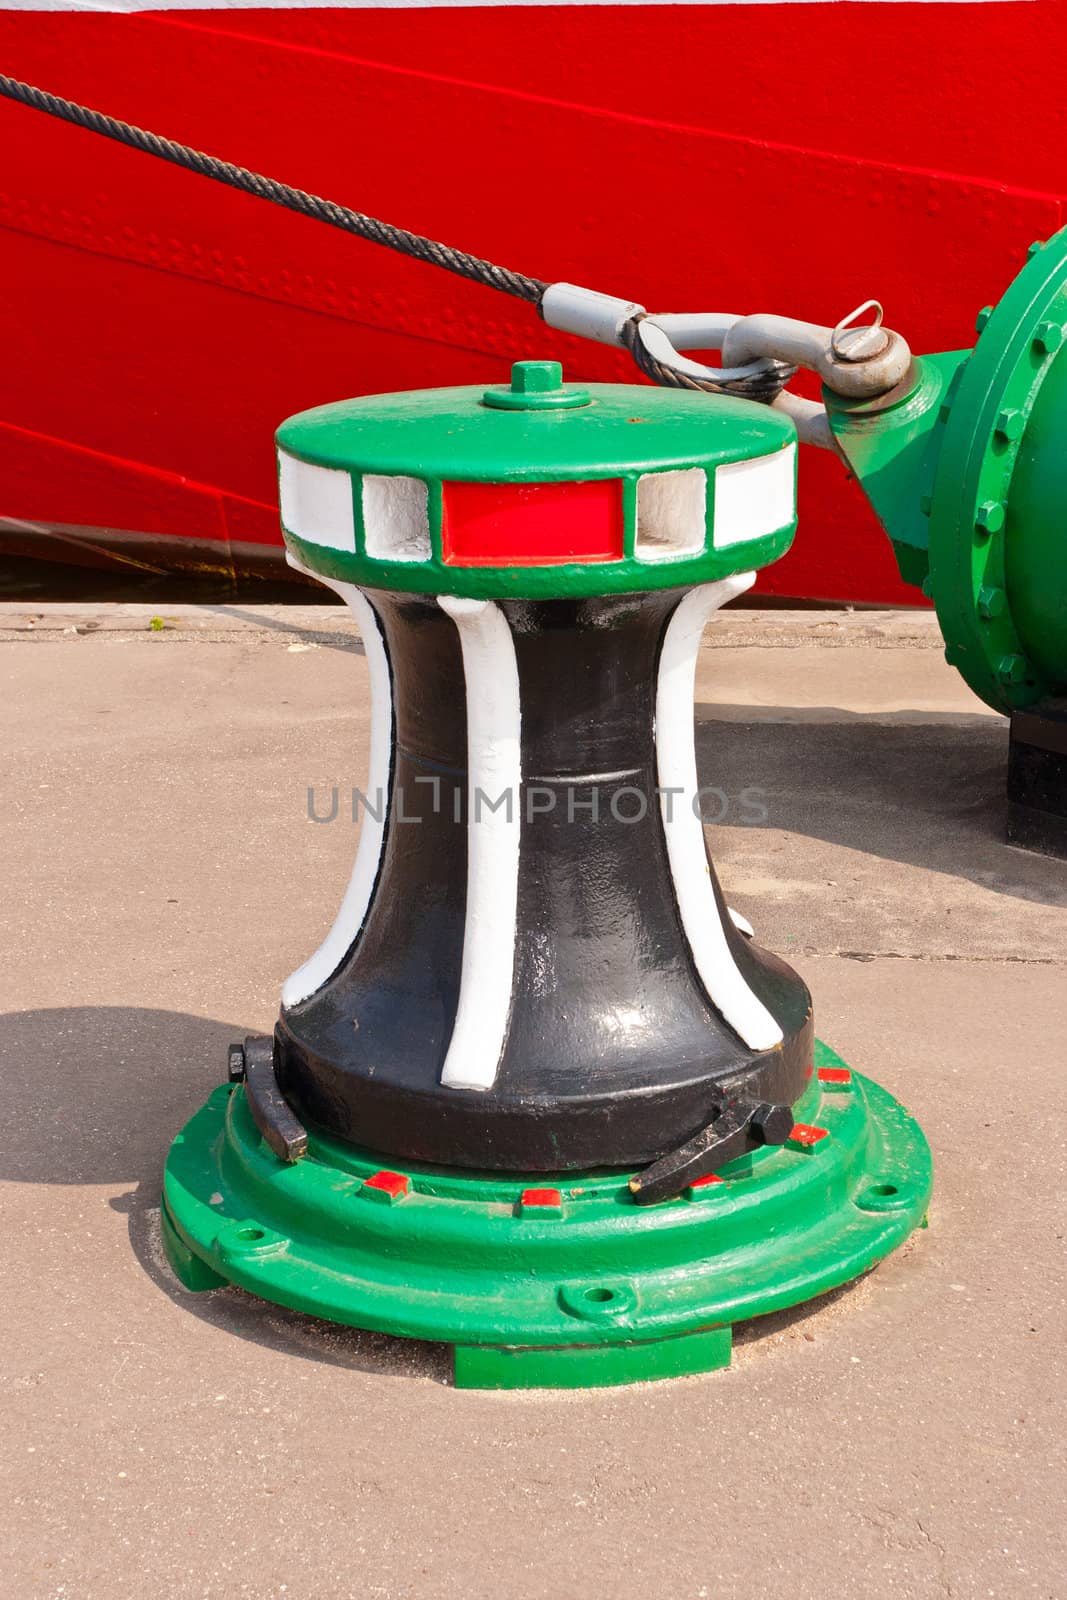 Bollard is a short vertical post used on a quay for mooring.